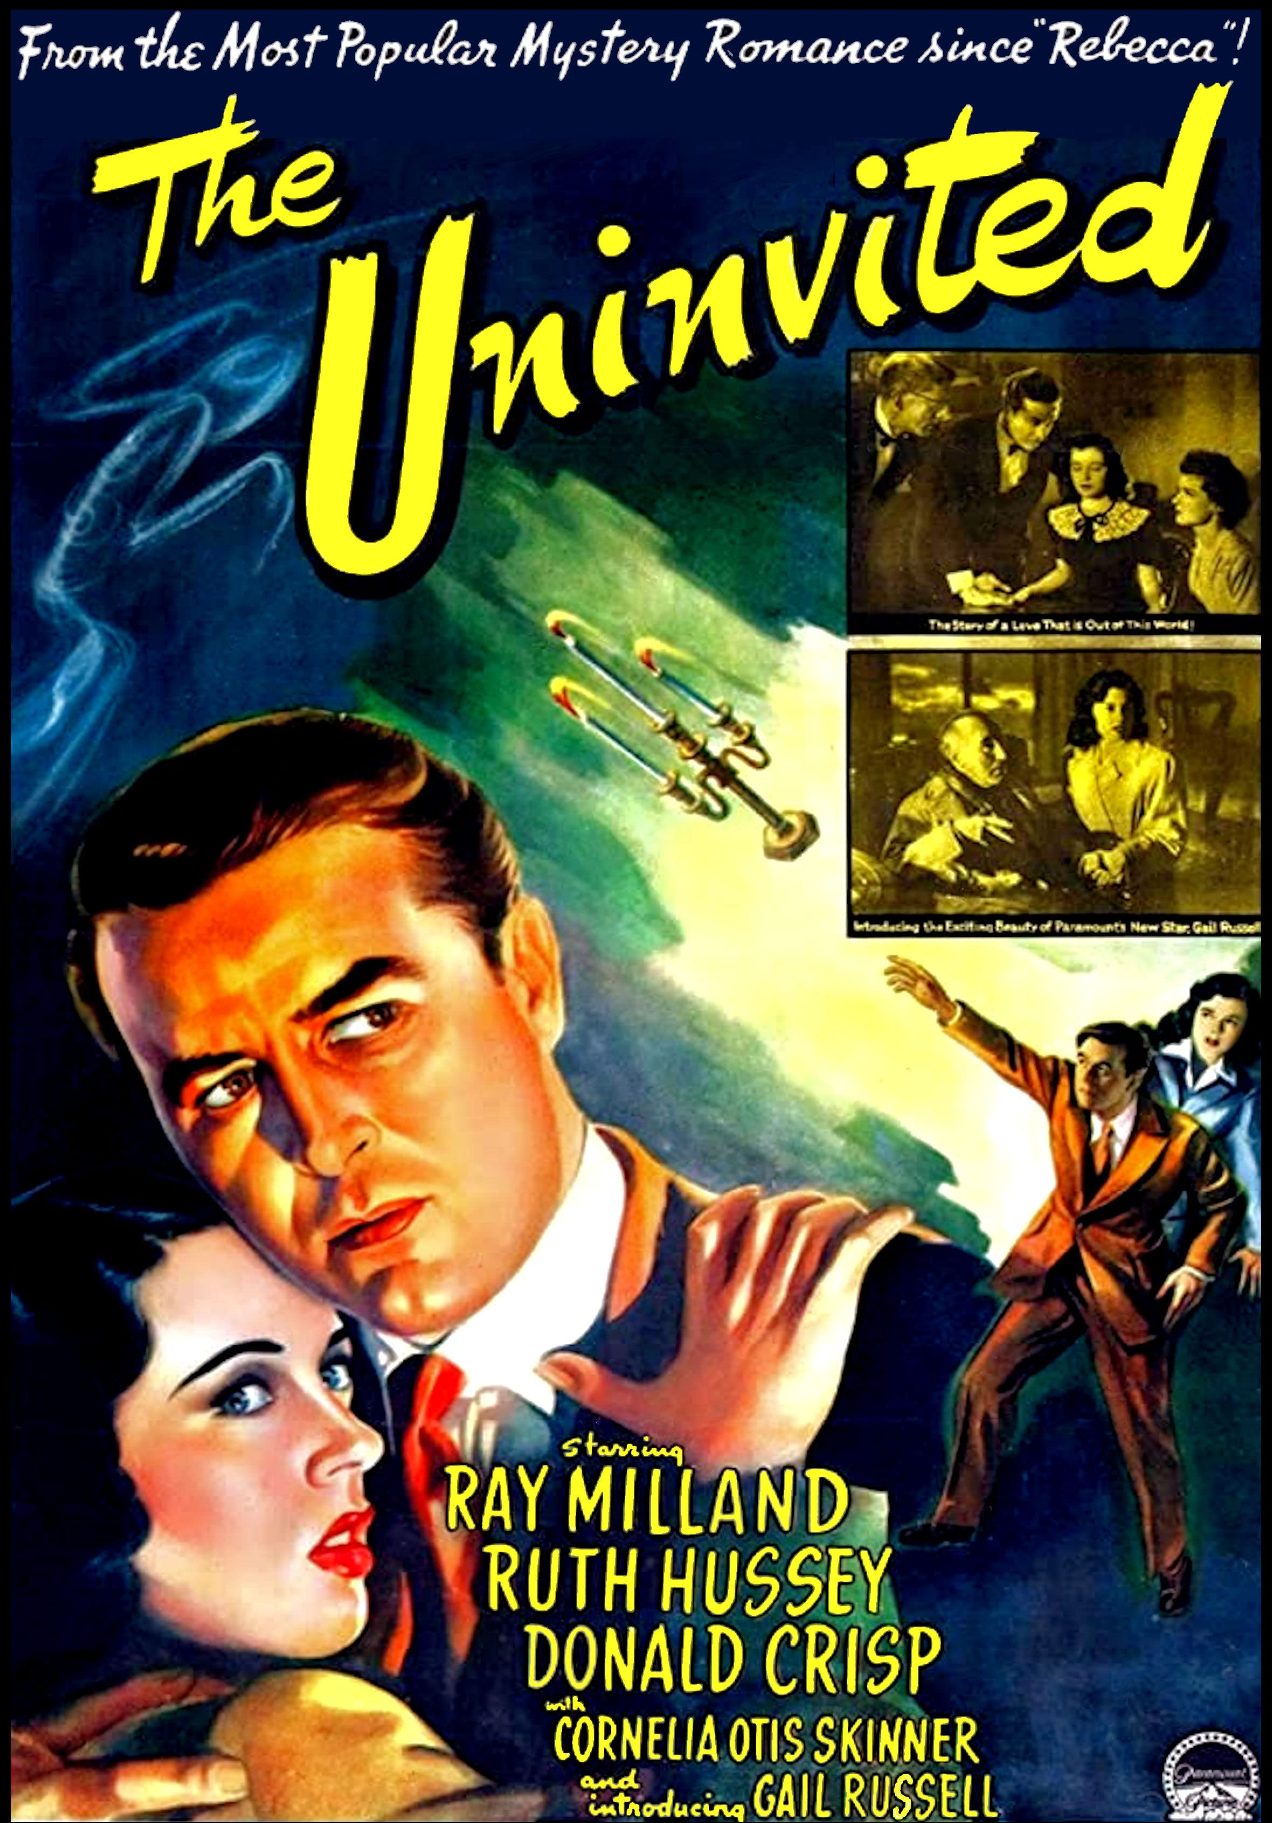 An illustrated image featuring a concerned image of a man and woman in the foreground. The background features the same man in front of the woman throwing a candelabra at a foggy apparition. The title of the film appears above with cast and production information below.